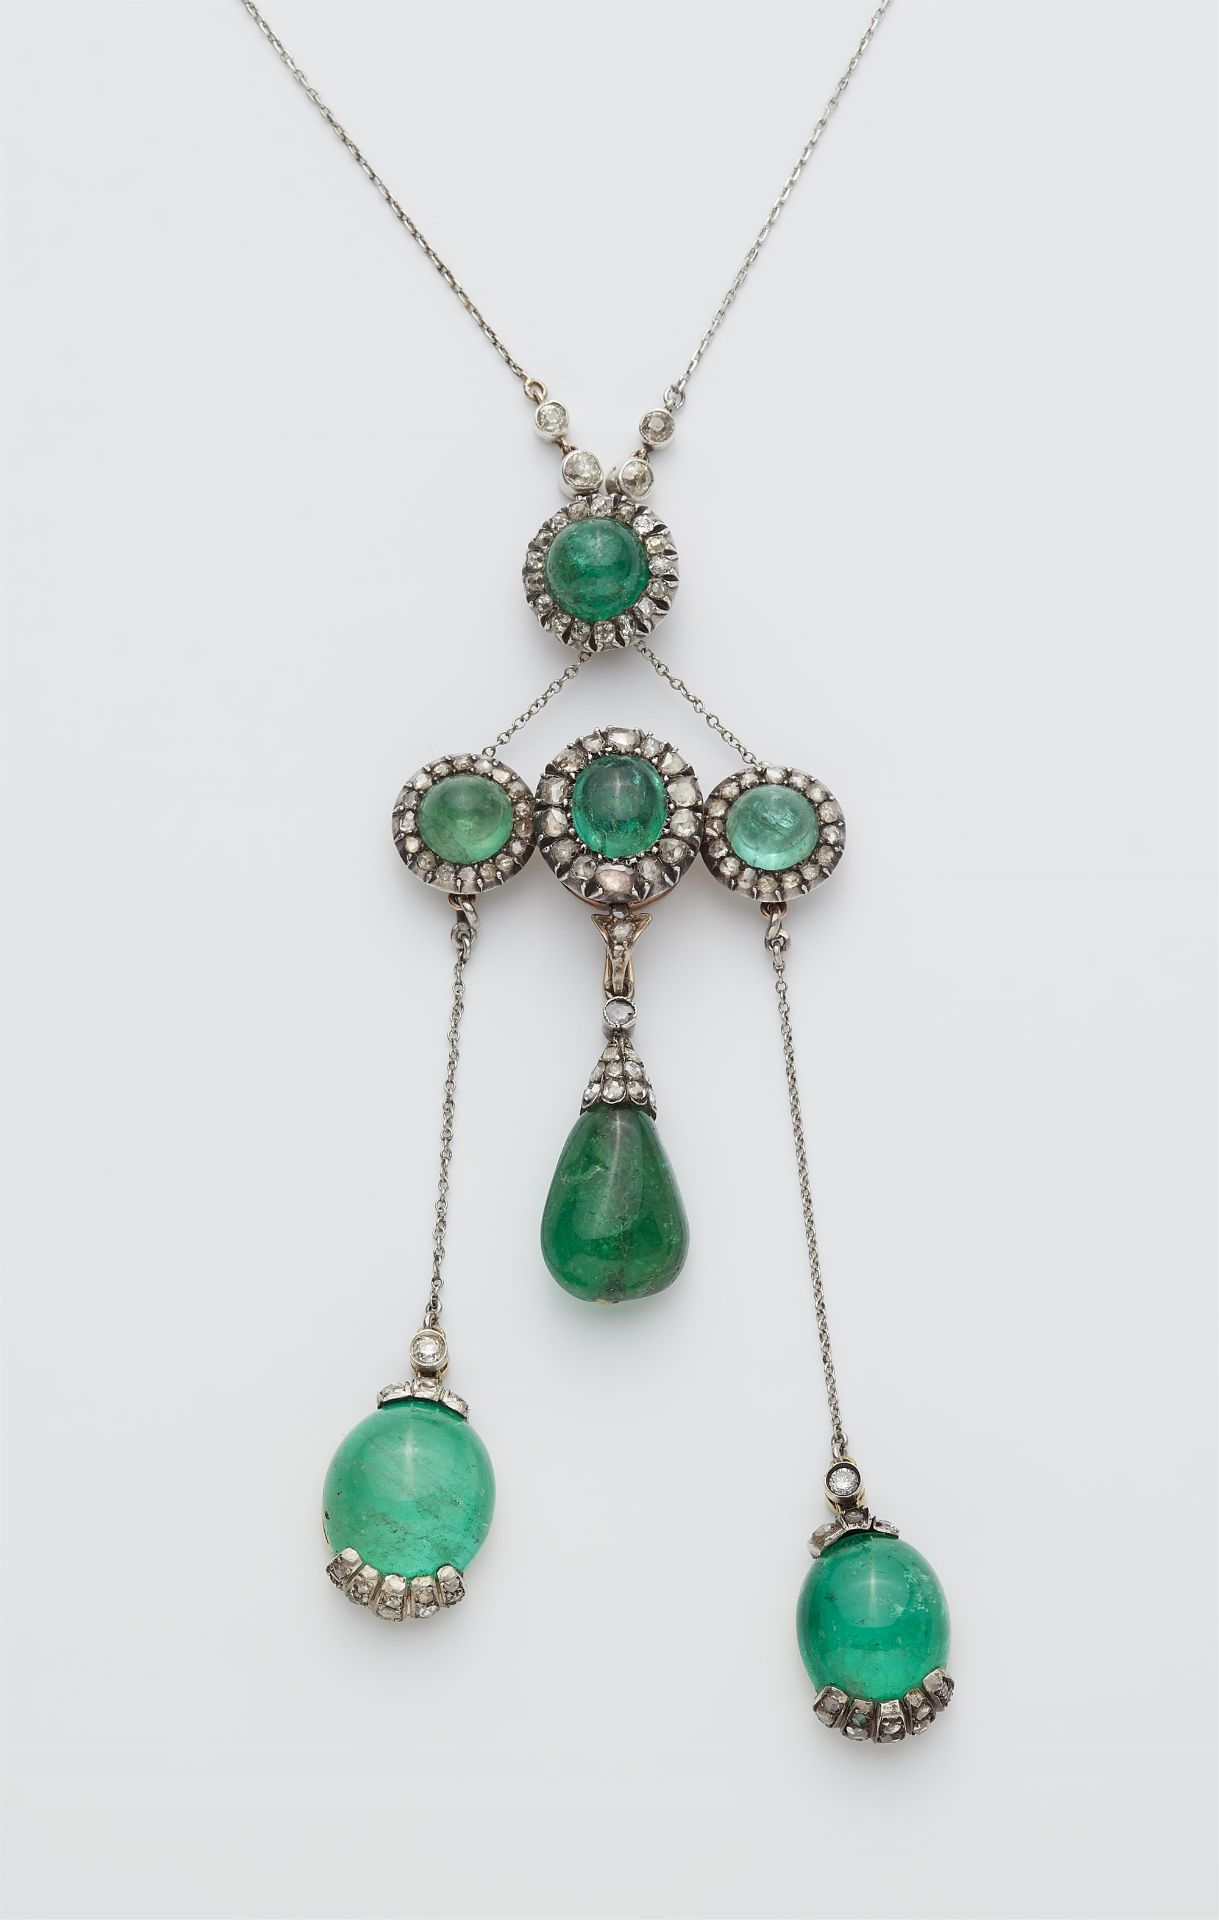 Parts of Italian antique silver 14k gold, emerald and diamond jewellery set comprising a multi-part  - Image 2 of 4